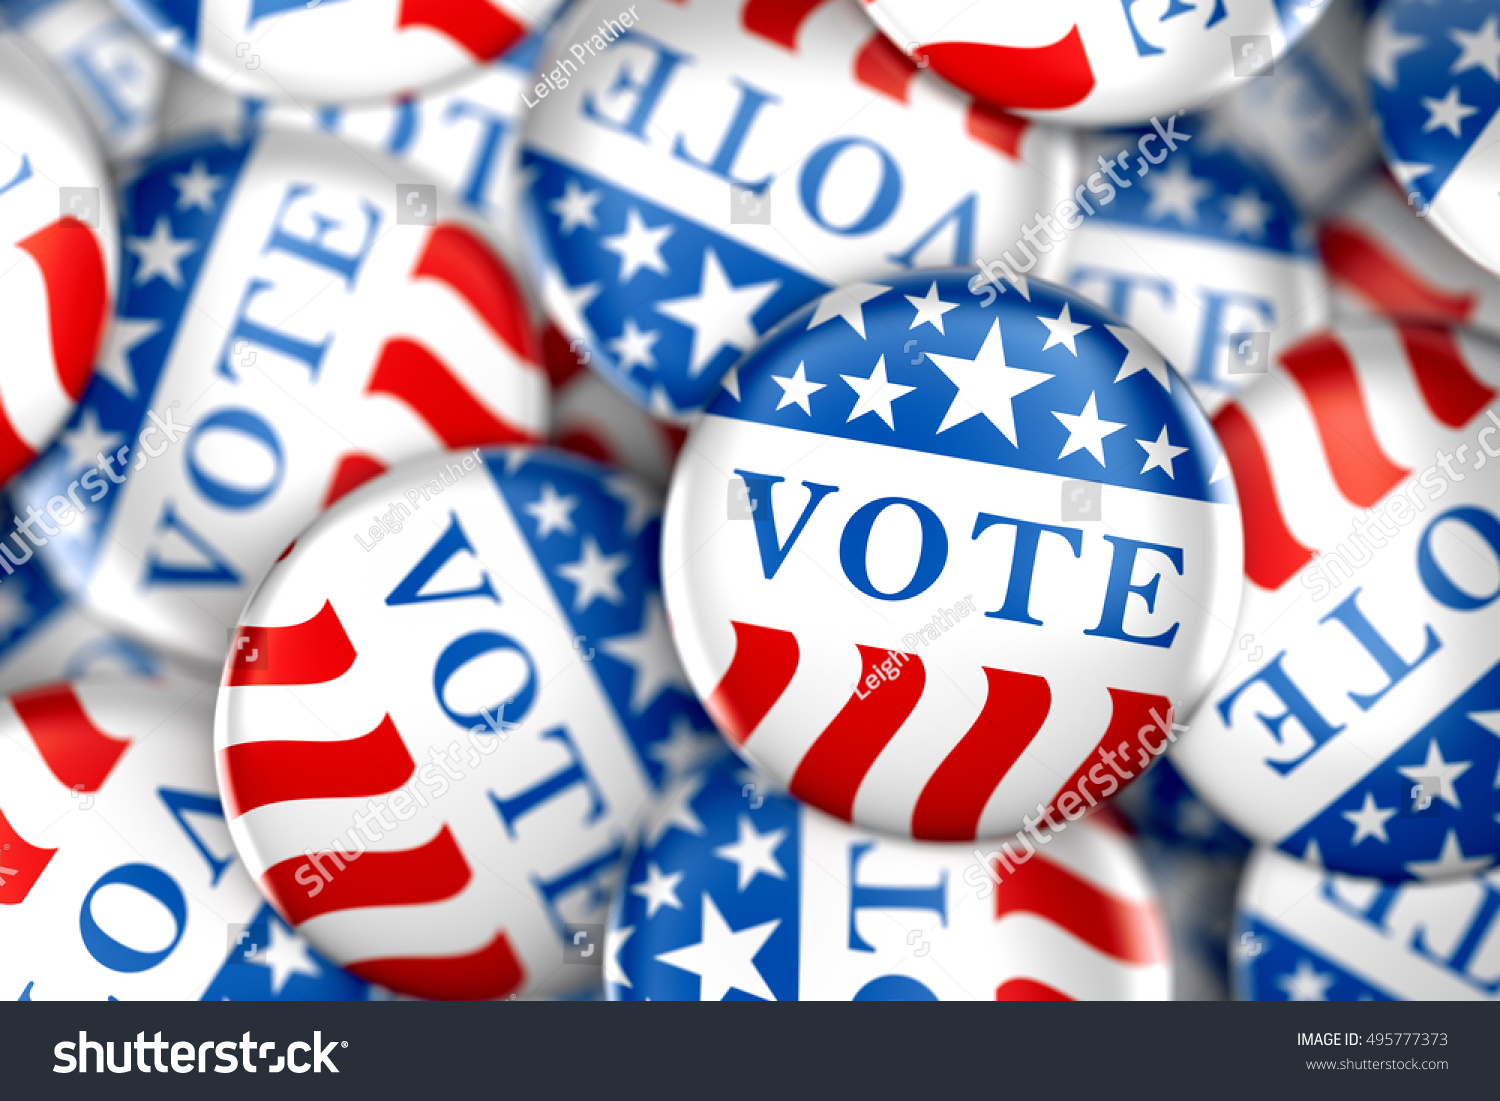 Vote buttons in red, white, and blue with stars - 3d rendering #495777373